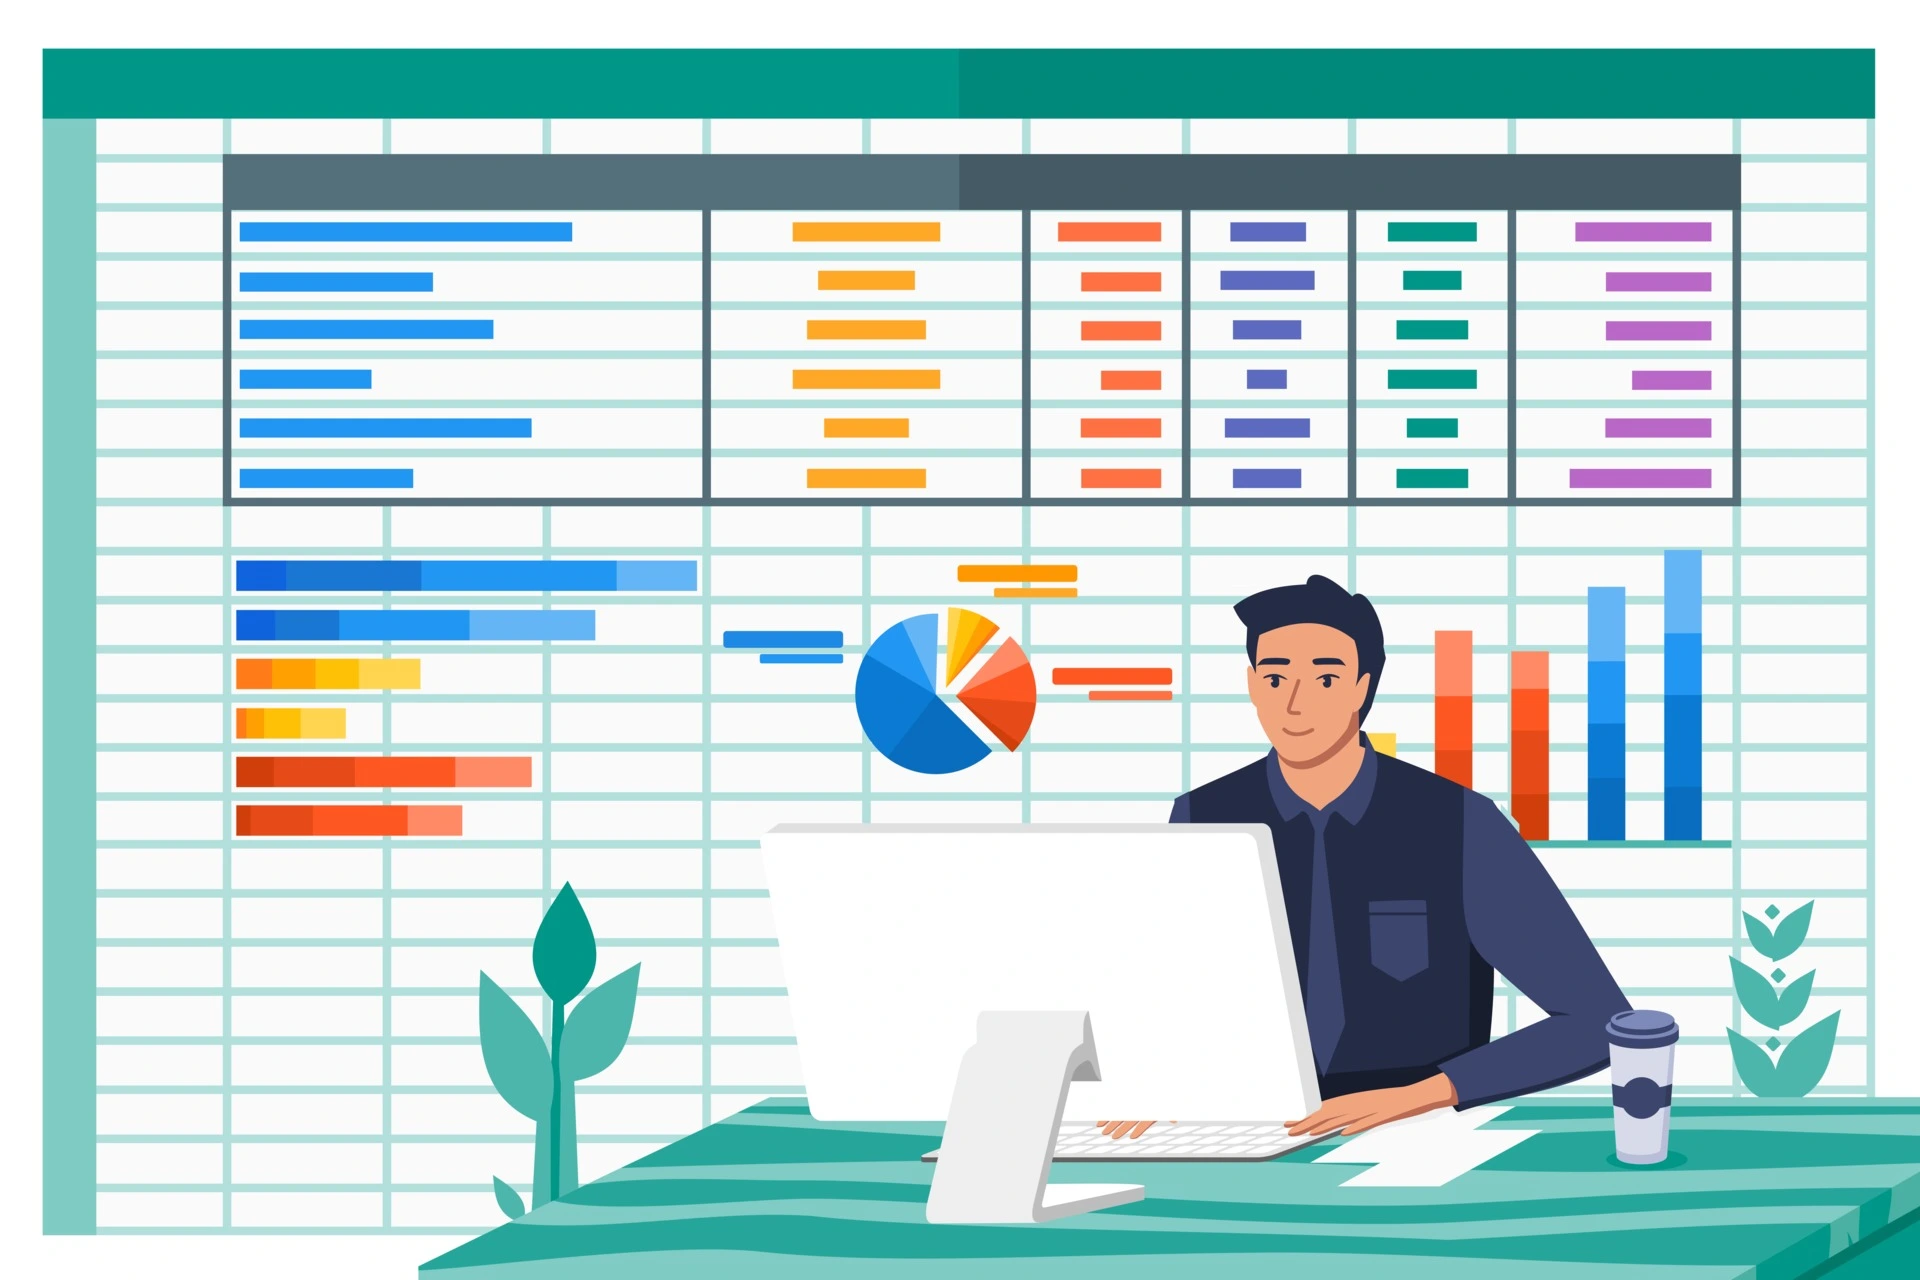 Task Management. Microsoft Excel and Google Sheet fall short. Here’s why you need to evaluate a Productivity tool like Pronnel.